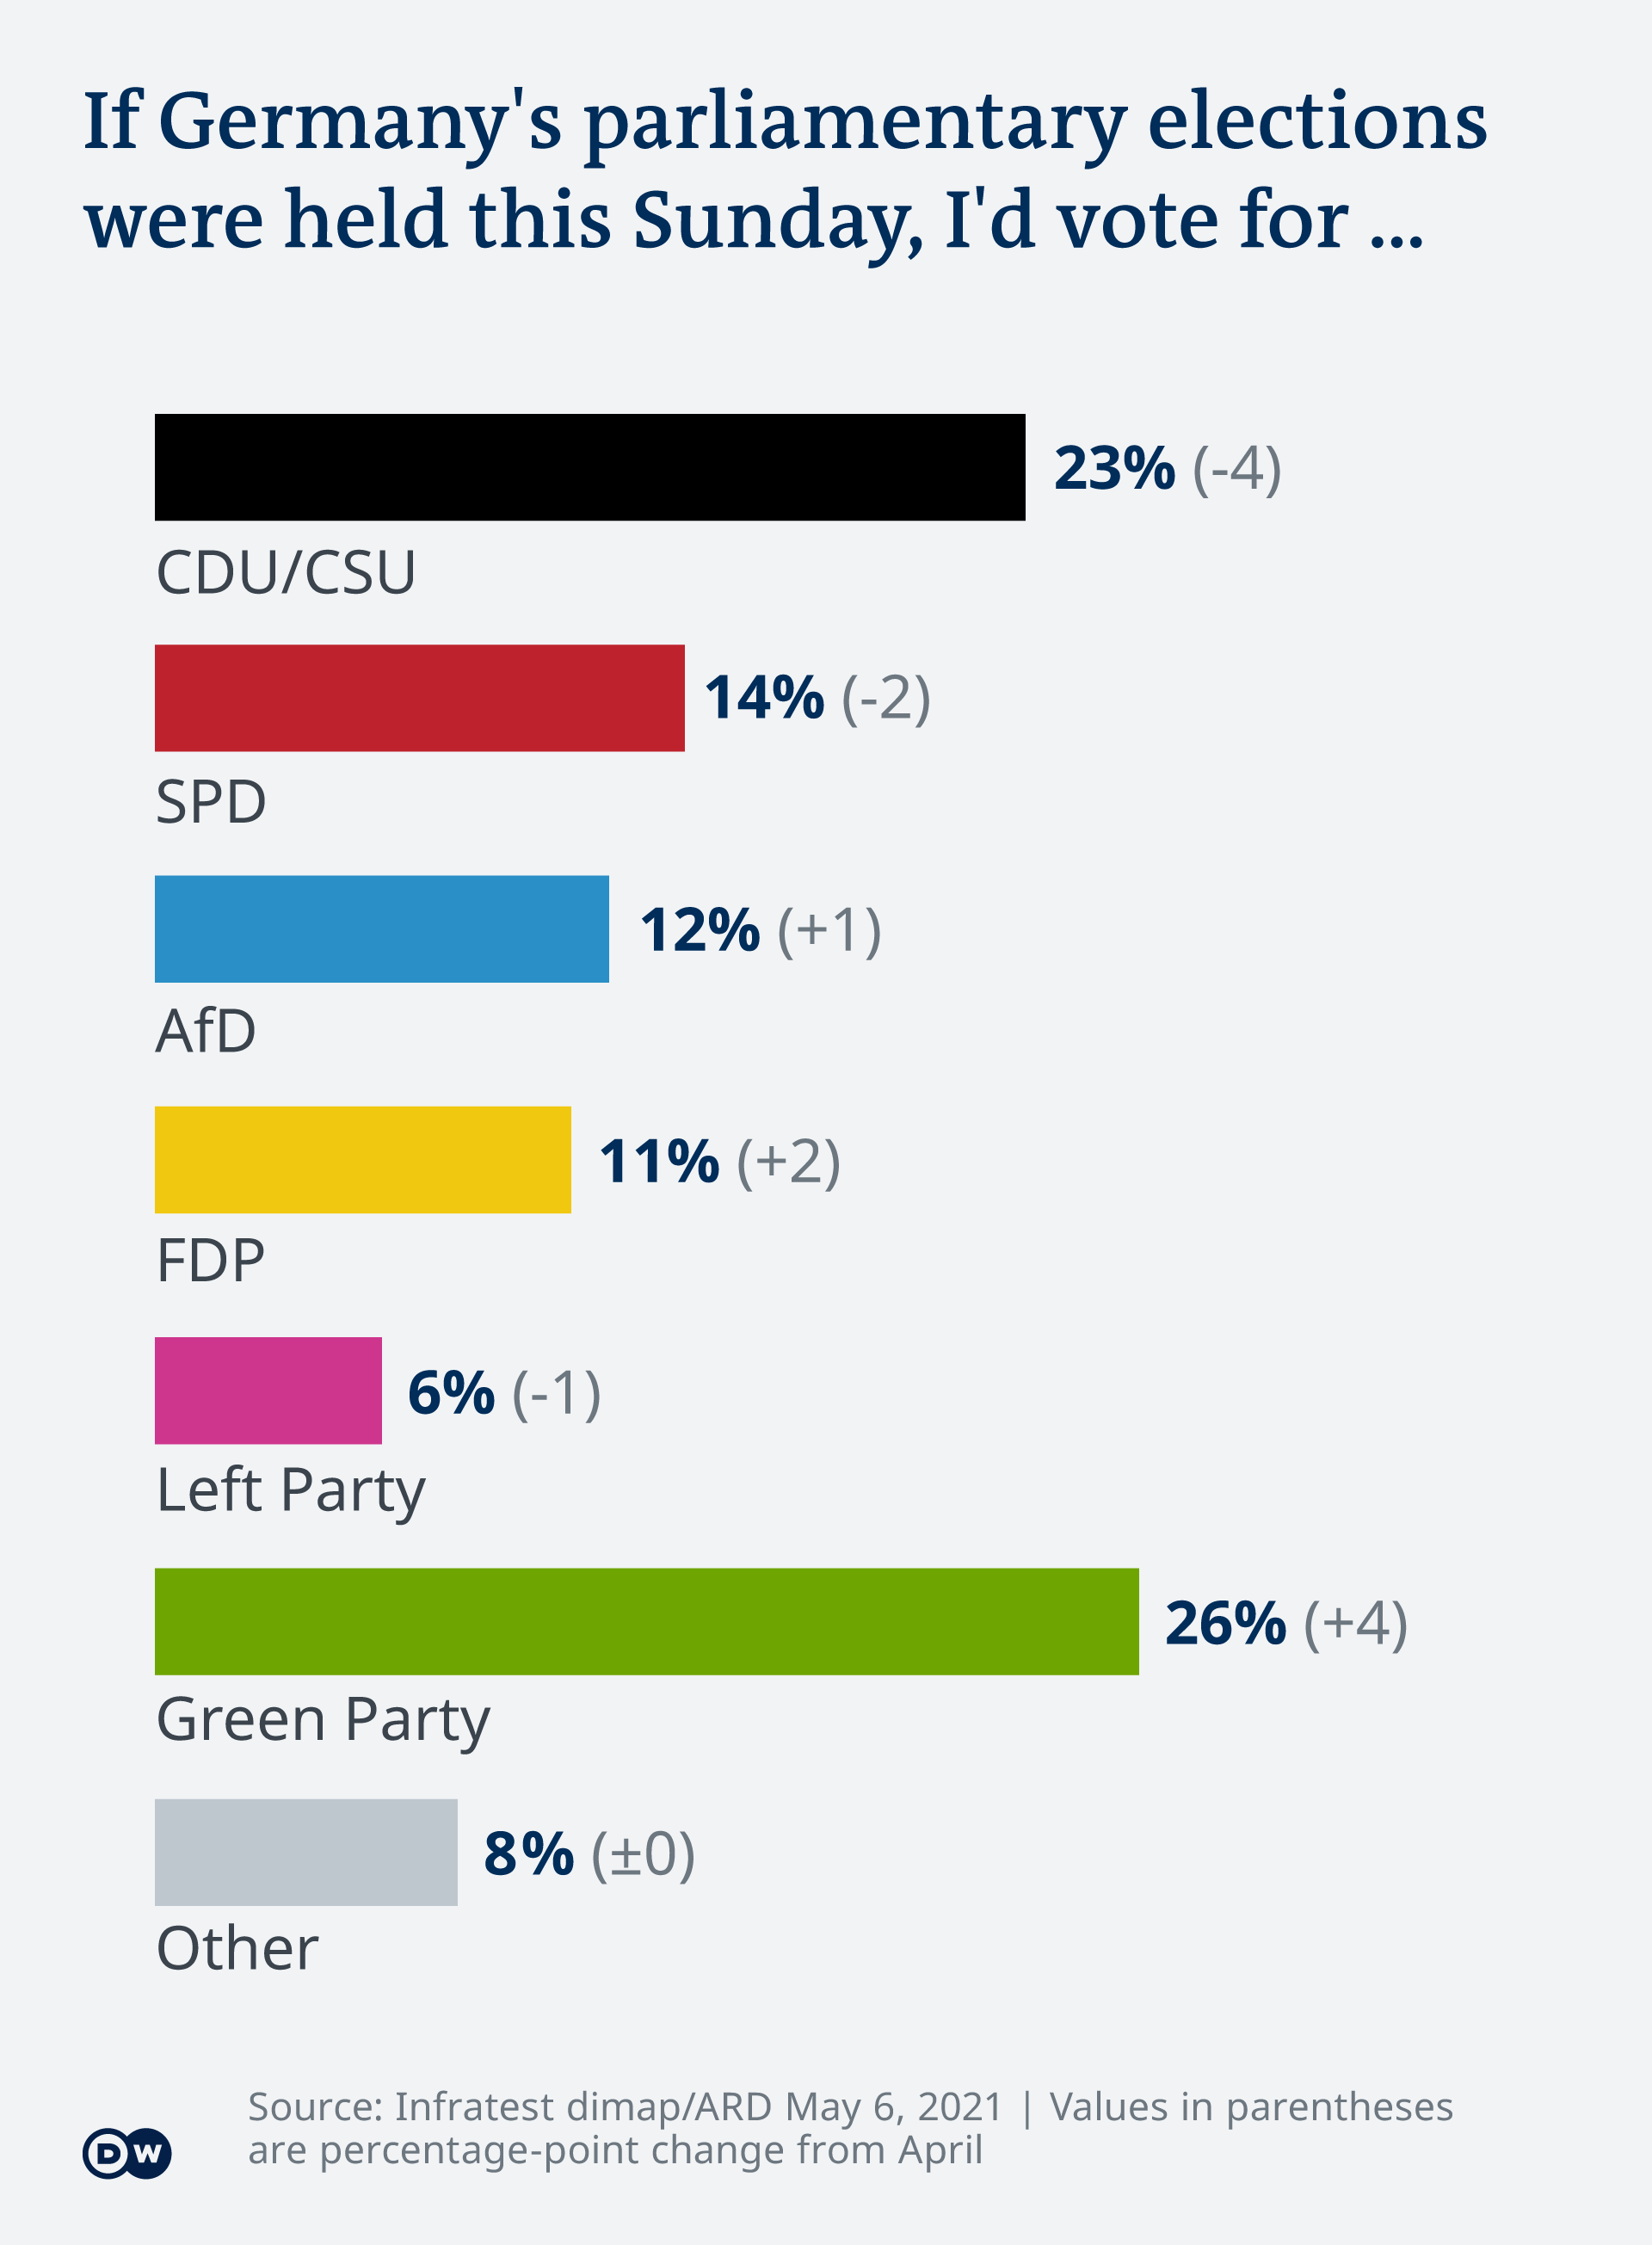 Opinion poll from early May puts the AfD at around 10% of the vote